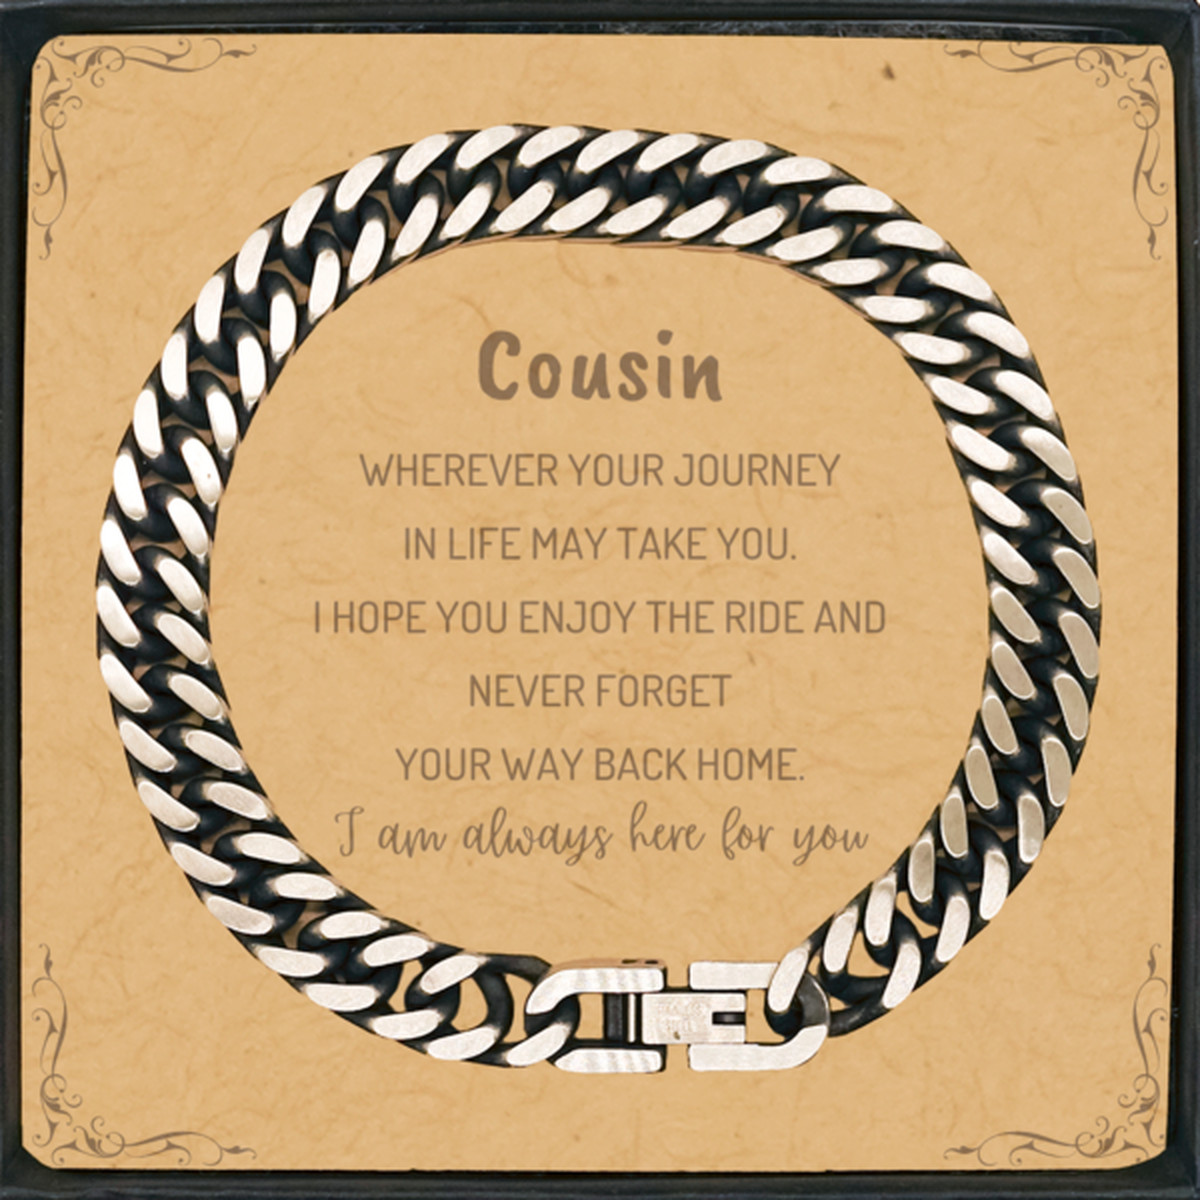 Cousin wherever your journey in life may take you, I am always here for you Cousin Cuban Link Chain Bracelet, Awesome Christmas Gifts For Cousin Message Card, Cousin Birthday Gifts for Men Women Family Loved One